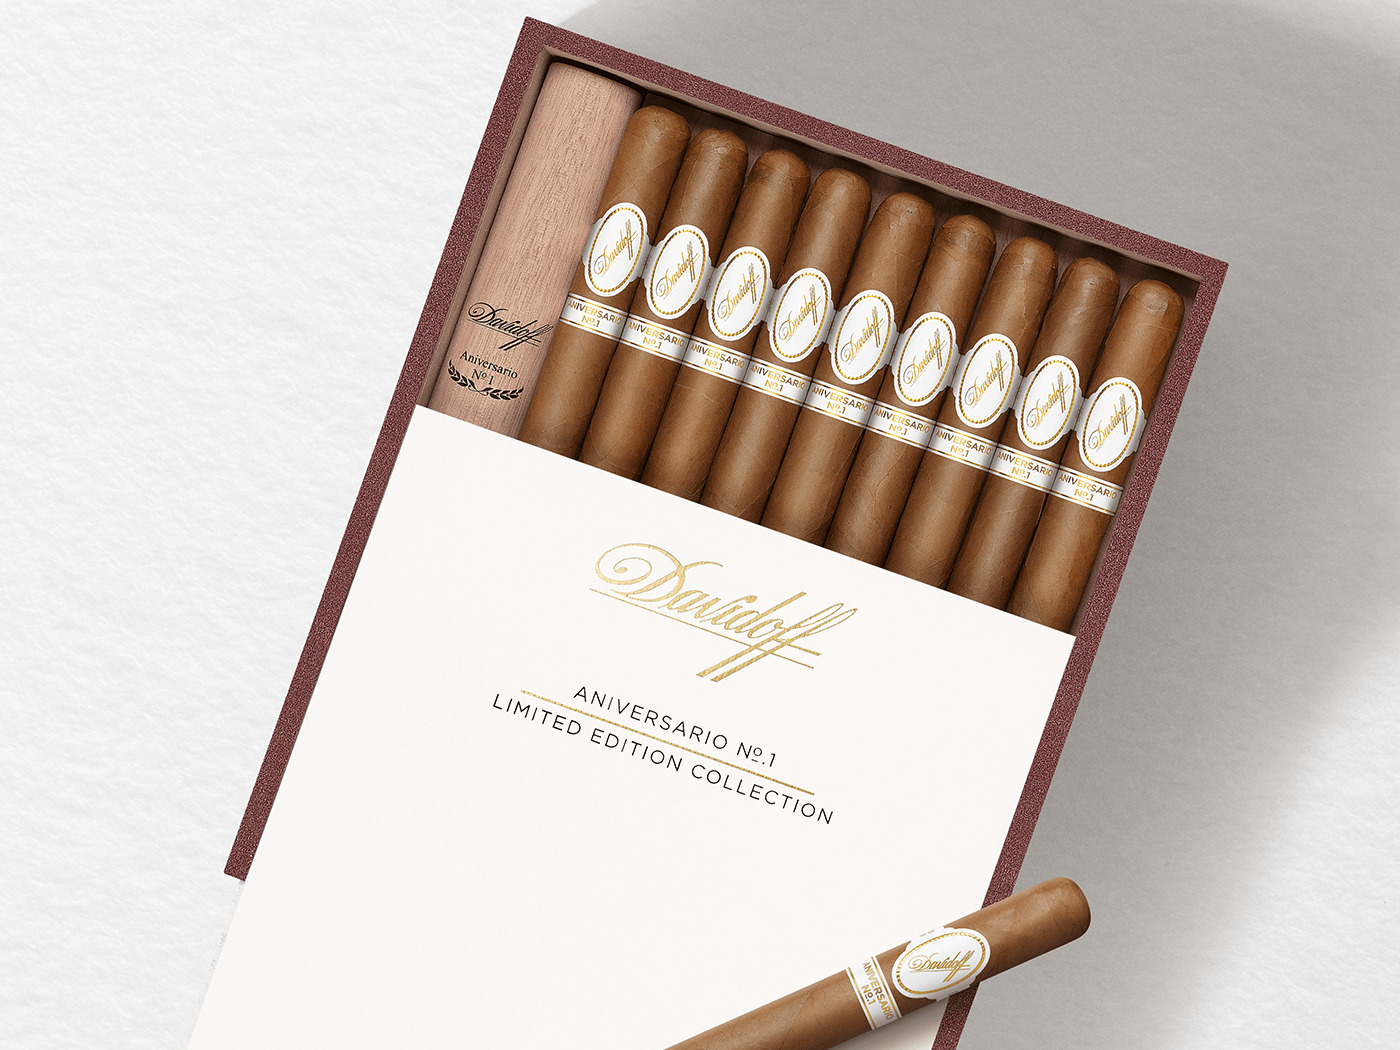 Opened box with ten Davidoff Aniversario No. 1 cigars inside, out of which one comes in a wooden tubo, and one cigar placed on top.